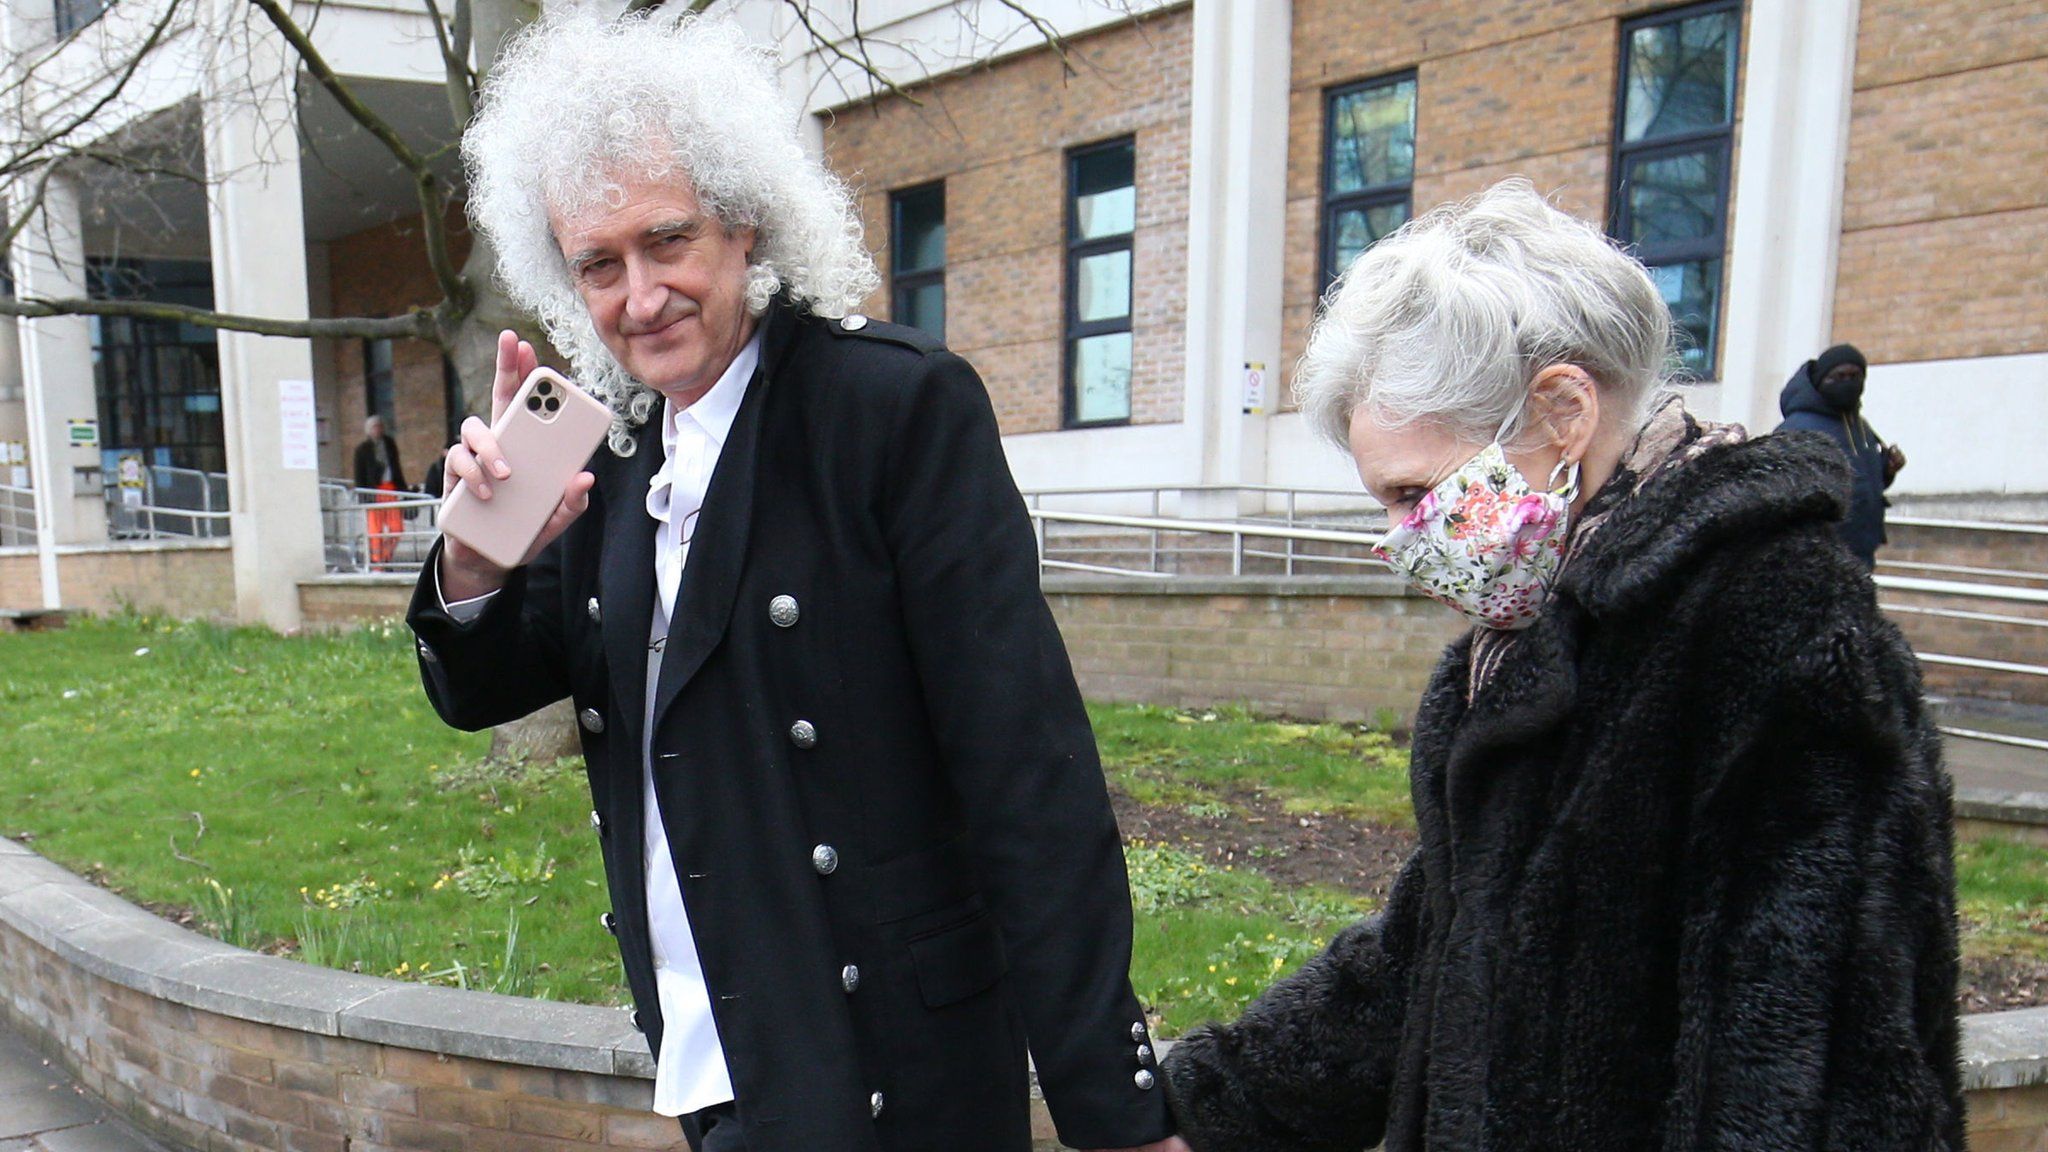 Brian May defends chauffeur over sex abuse allegations